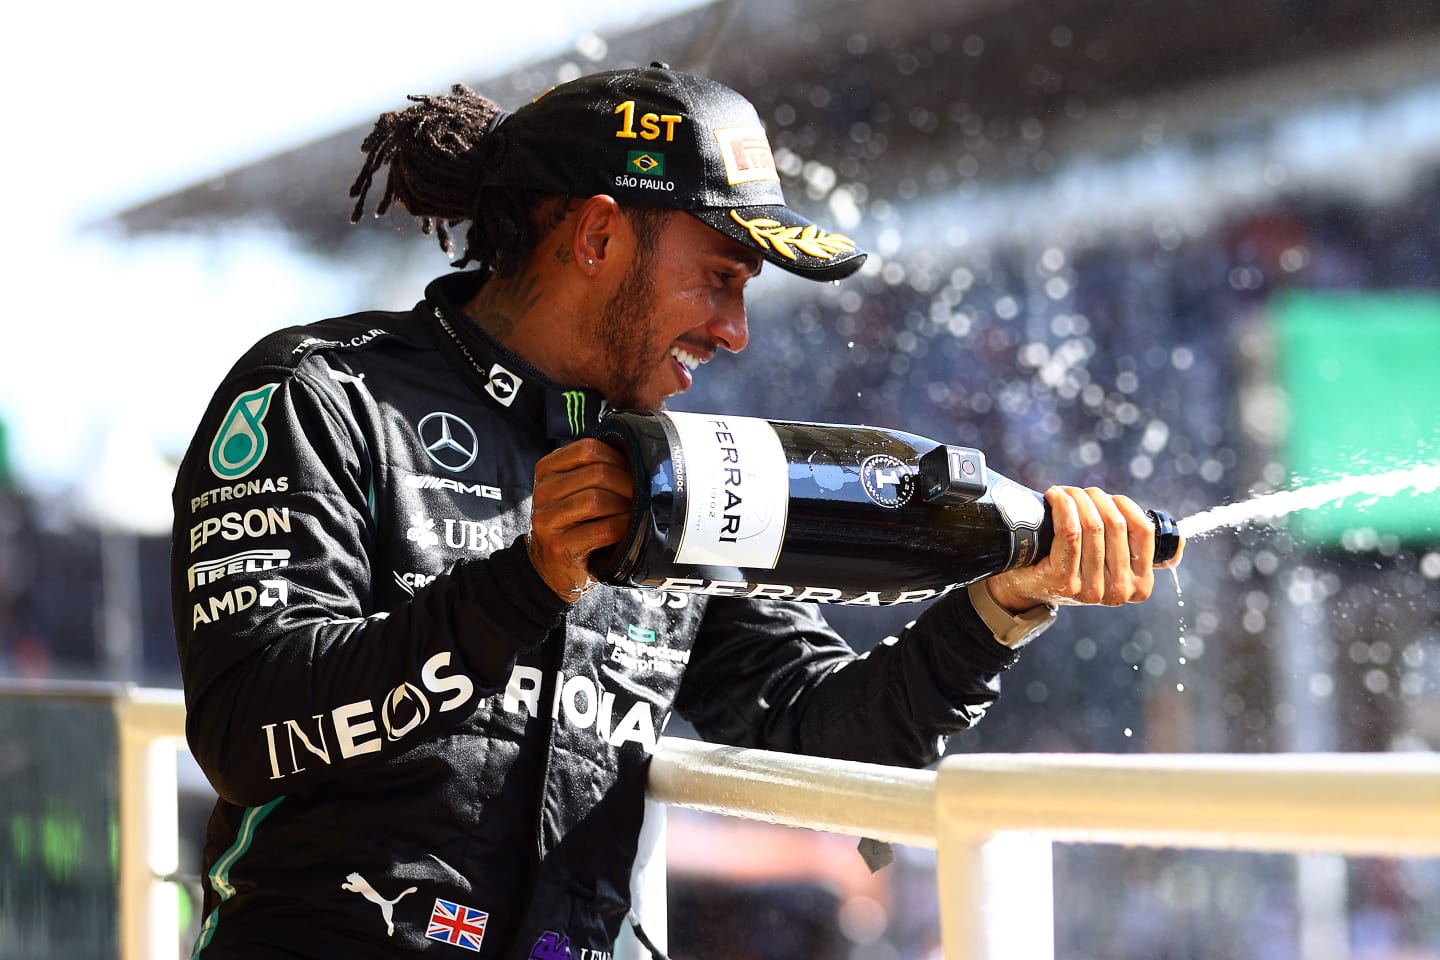 SAO PAULO, BRAZIL - NOVEMBER 14: Race winner Lewis Hamilton of Great Britain and Mercedes GP celebrates on the podium with sparkling wine during the F1 Grand Prix of Brazil at Autodromo Jose Carlos Pace on November 14, 2021 in Sao Paulo, Brazil. (Photo by Bryn Lennon - Formula 1/Formula 1 via Getty Images)